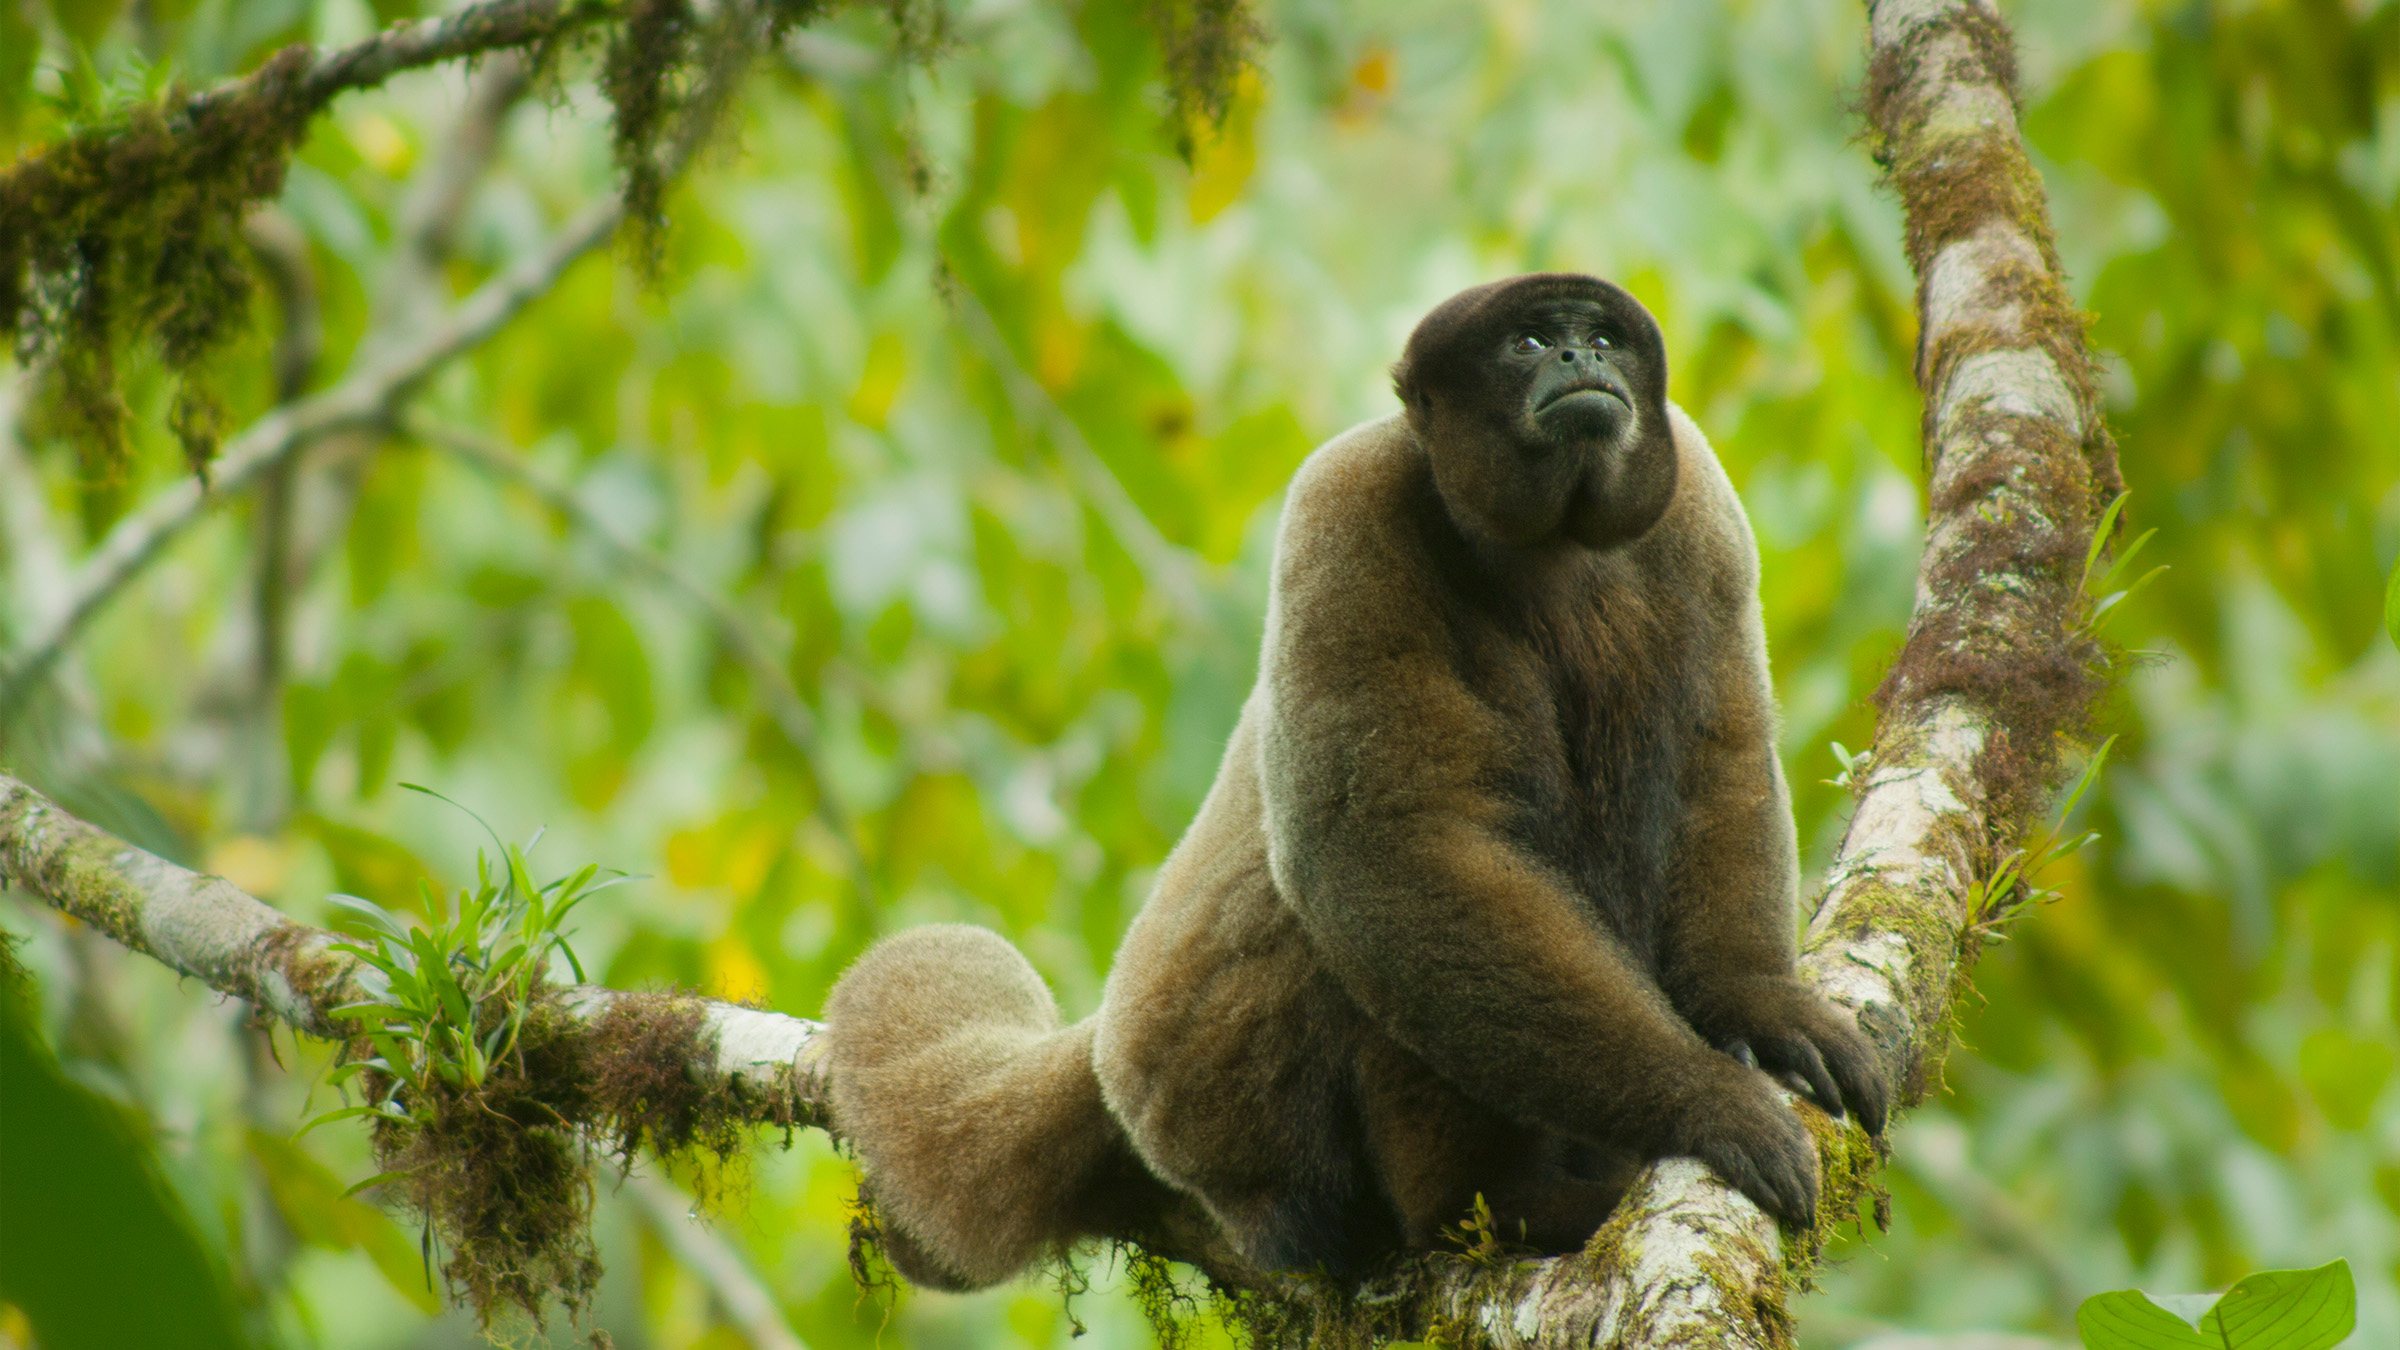 Ecuador's Constitutional Court Rules Wild Animals Are Subjects of Legal  Rights Under the Rights of Nature - Animal Legal Defense Fund